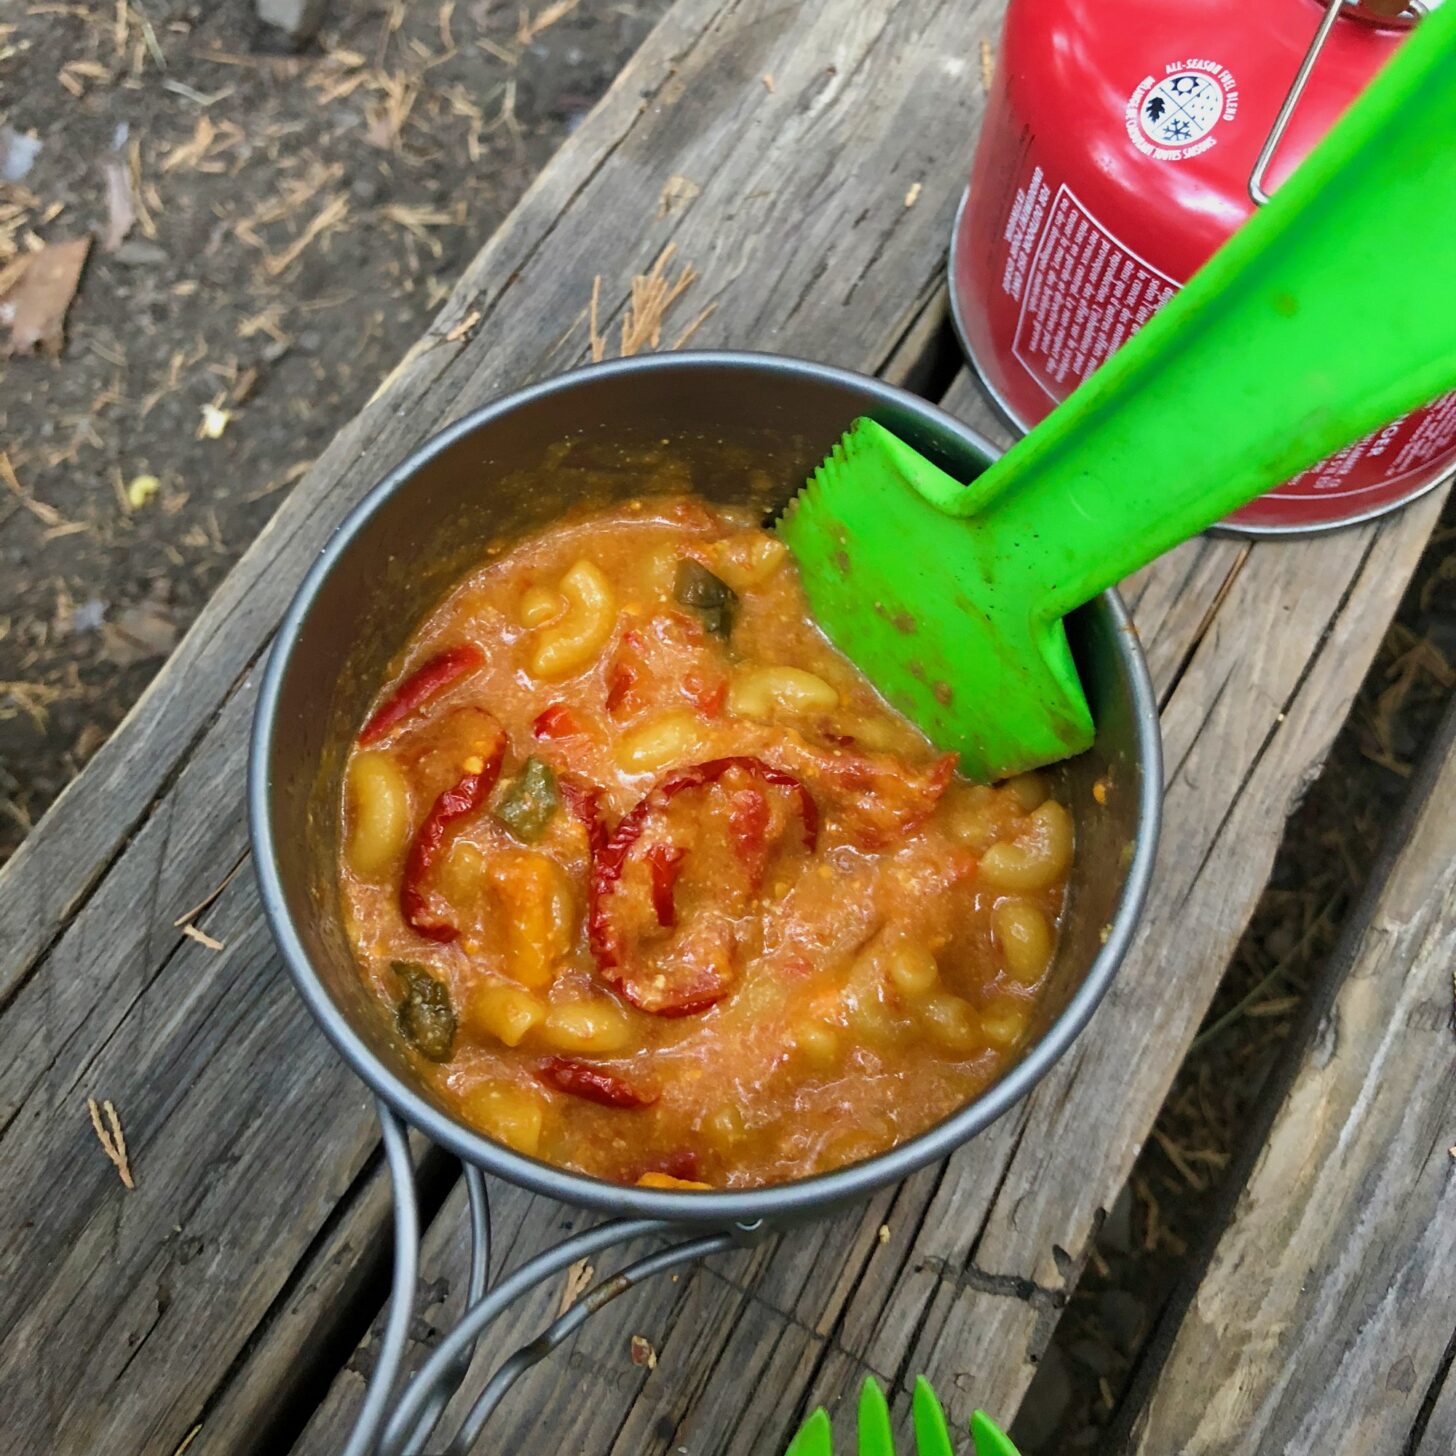 a shot from above, looking down into a pot of food. The food is a hearty-looking tomato sauce with macaroni noodles and cheese. A green plastic utensil sticks out of the pot.